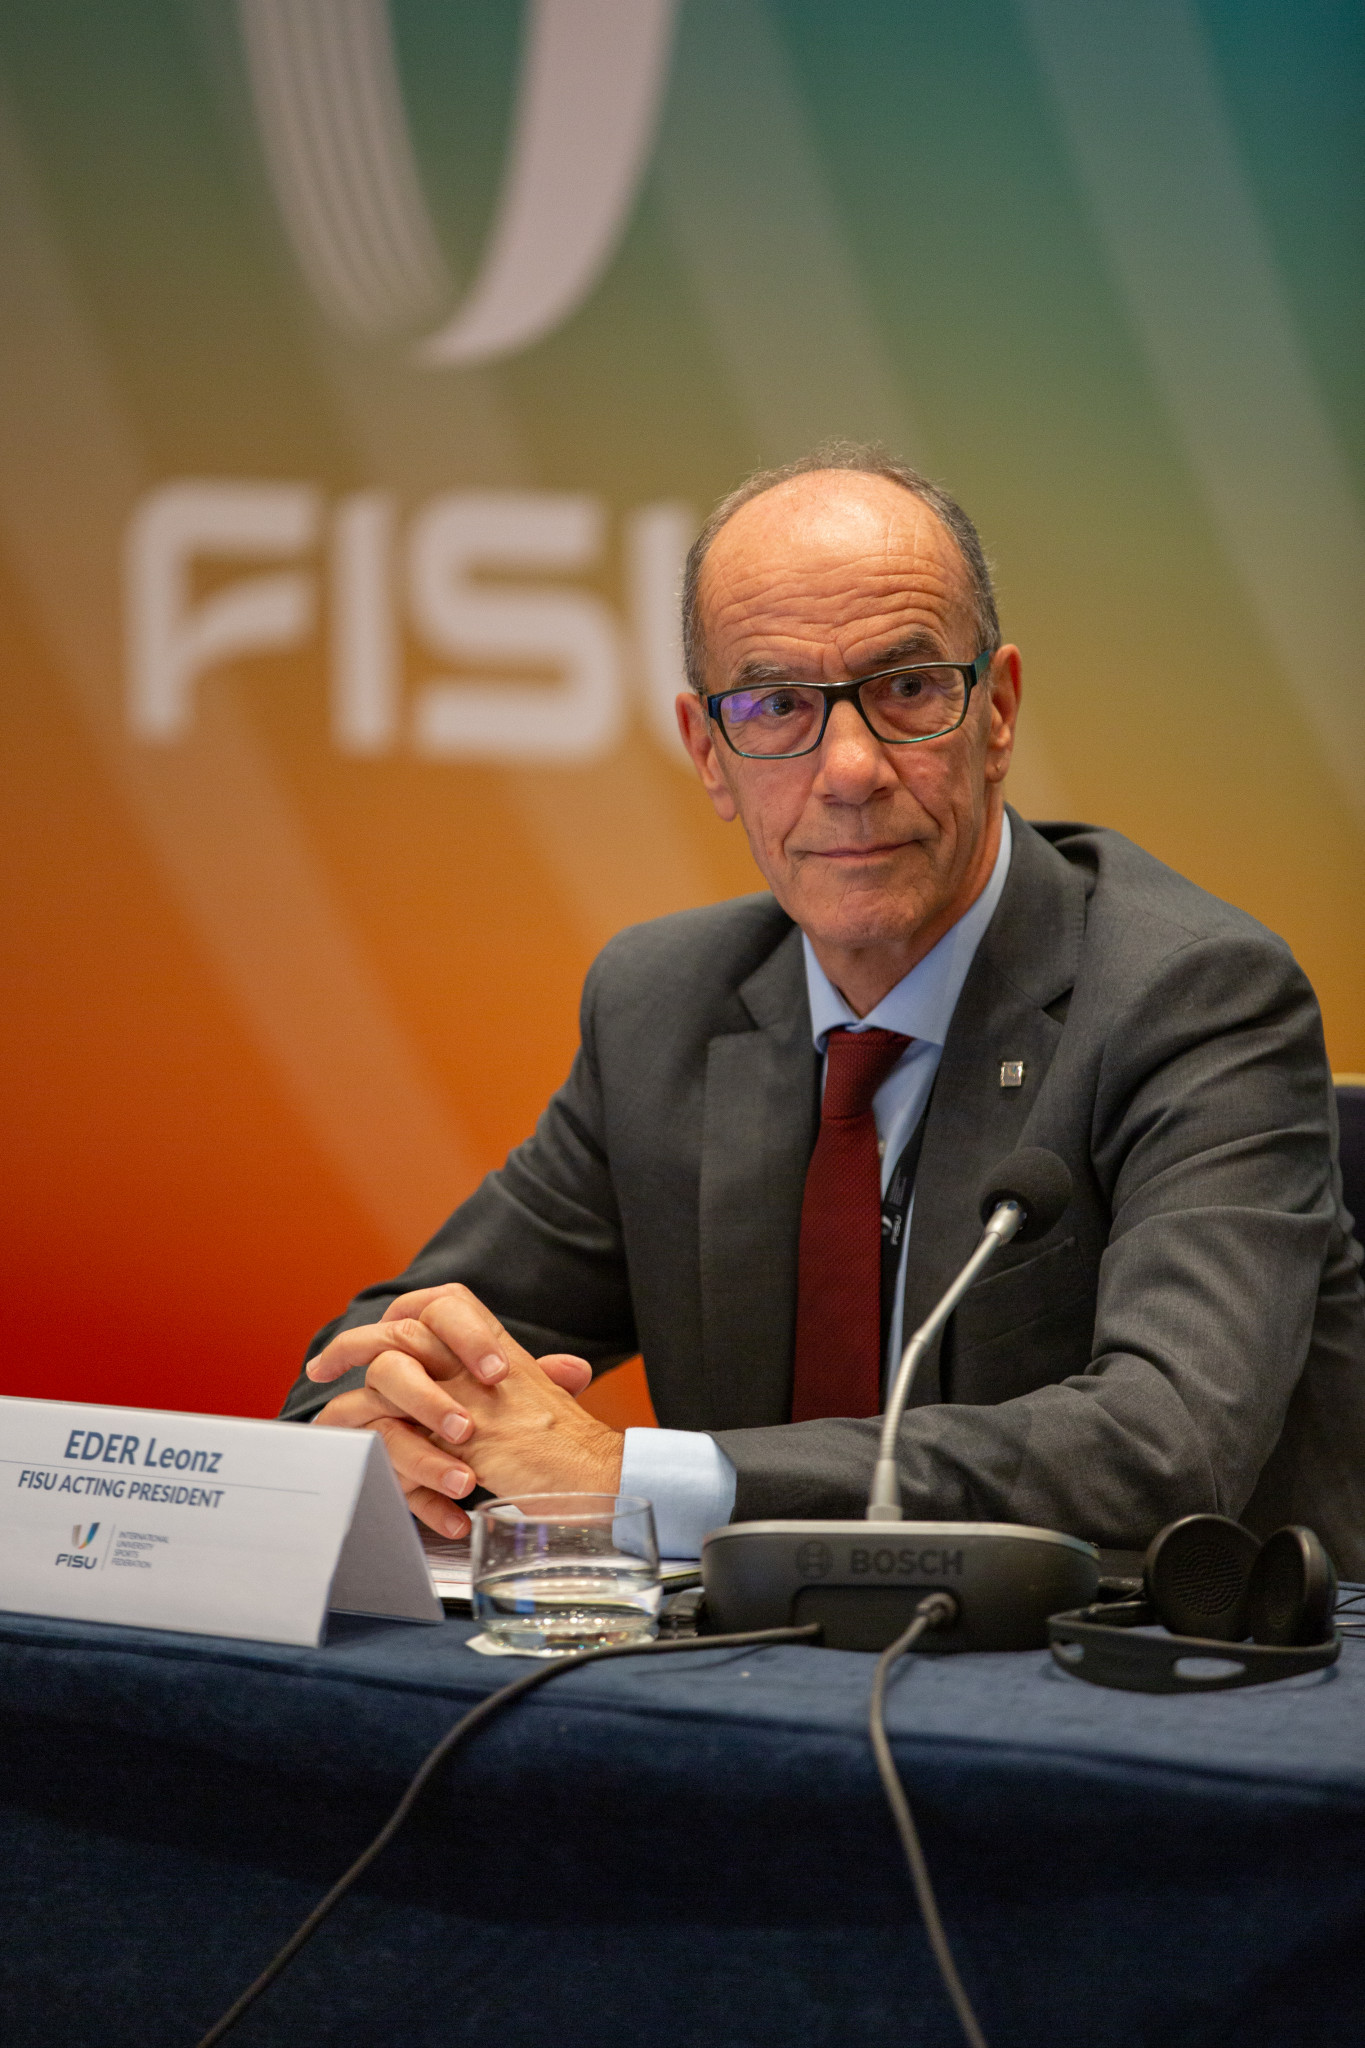 The FISU Acting President expressed hope that Chungcheong 2027 can provide "a lasting contribution to university sport" ©FISU